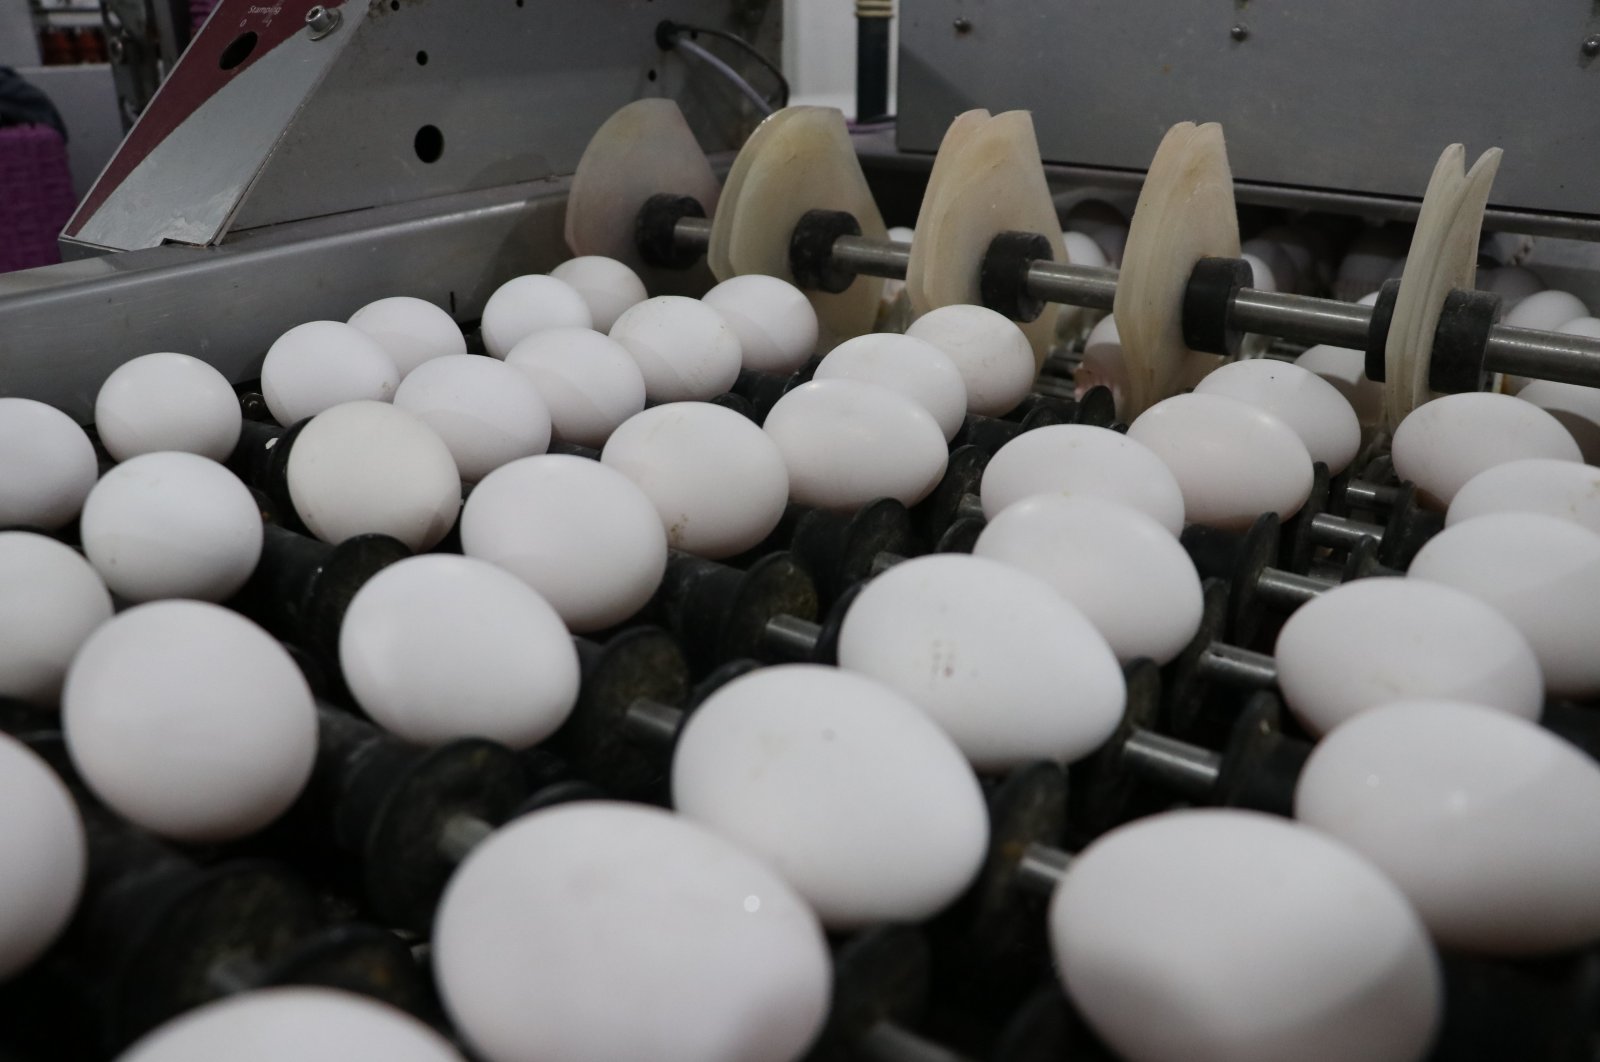 Turkey's total egg exports amounted to $215.82 million in 2019. (AA Photo)